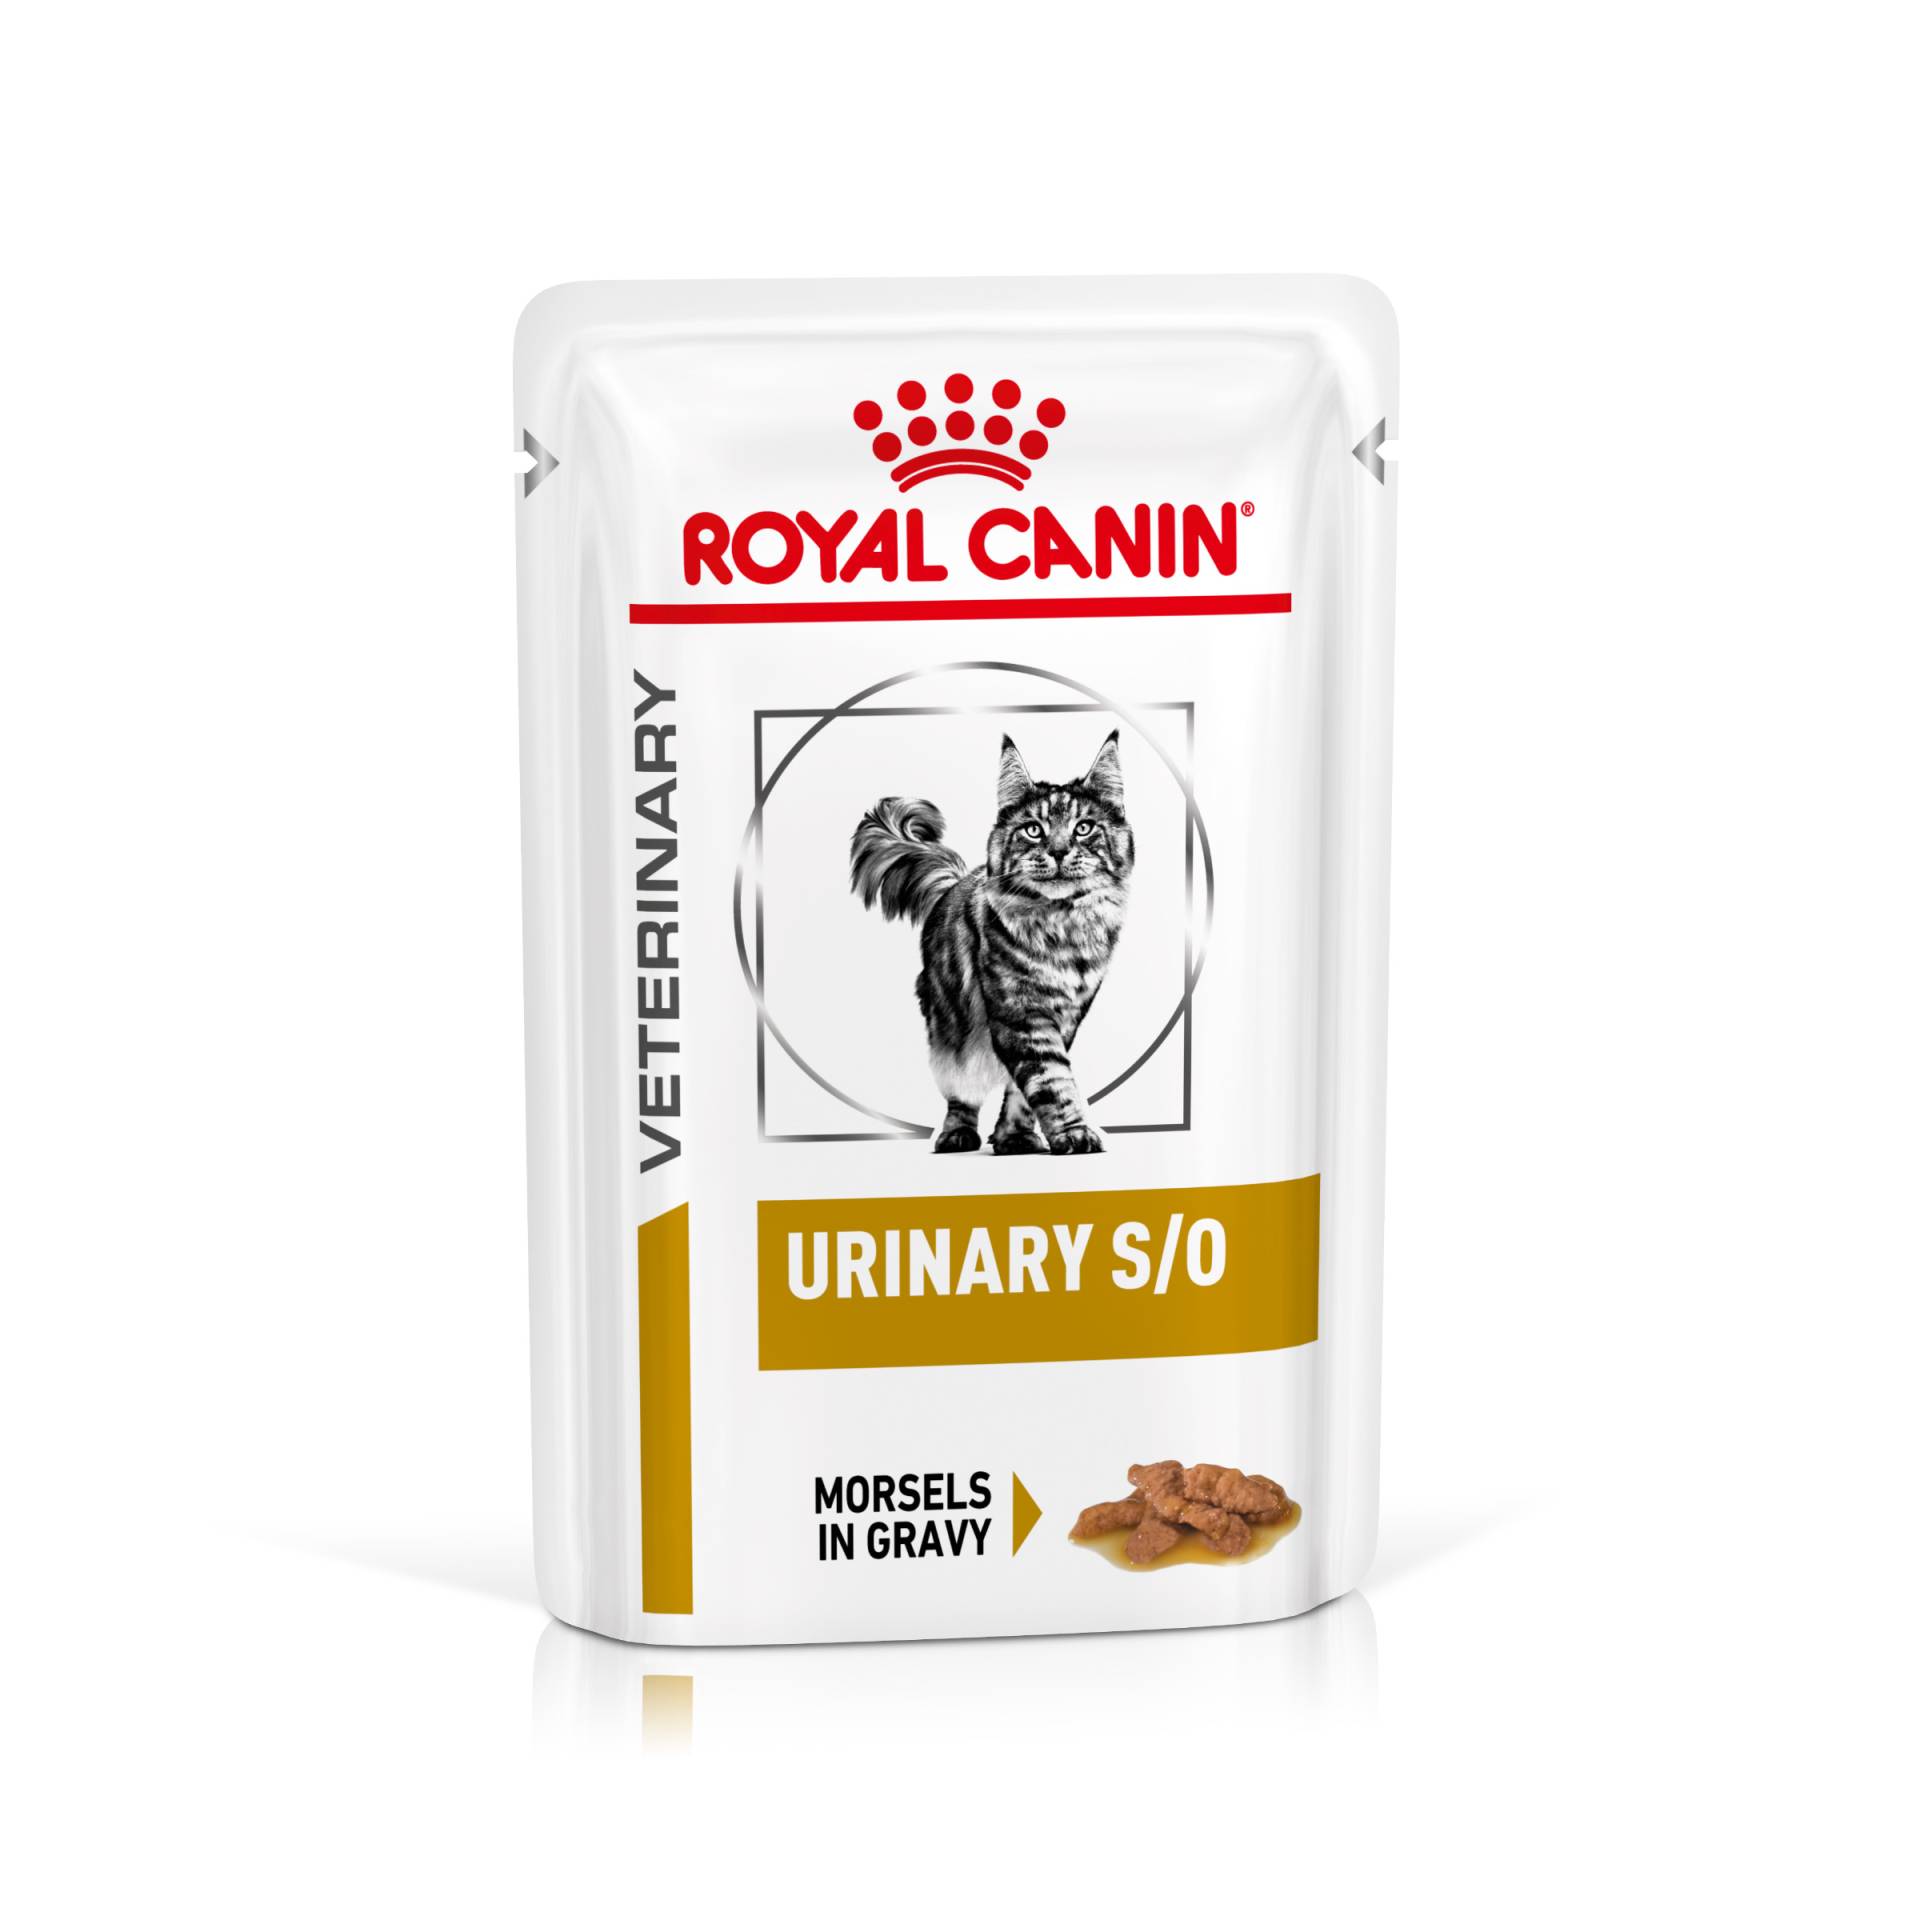 Royal Canin Veterinary Feline Urinary S/O in Soße oder Mousse - Häppchen in Soße (48 x 85 g) von Royal Canin Veterinary Diet